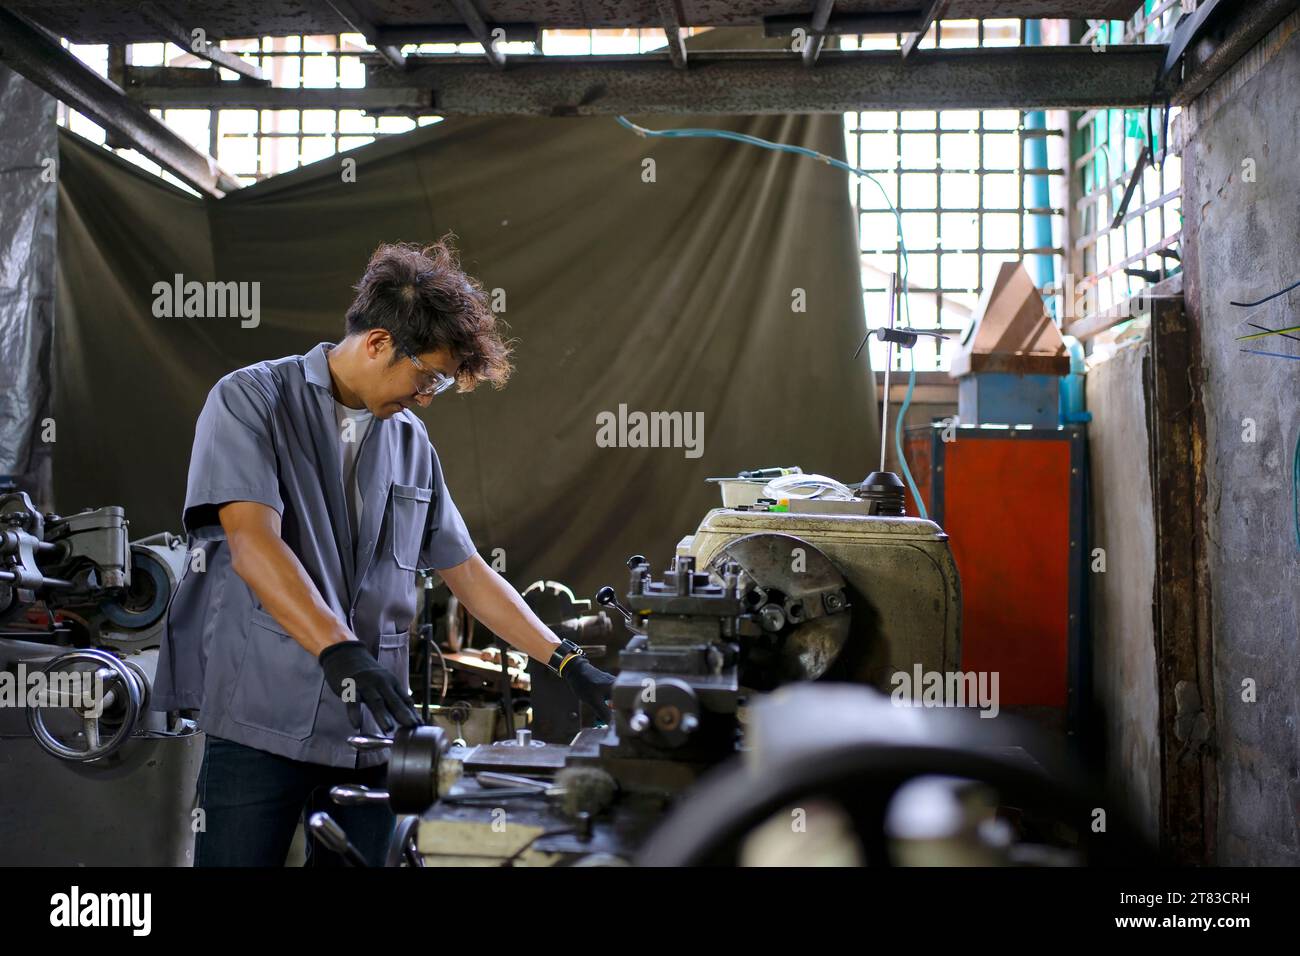 Trainee works at machine shop. Metalwork and education concept. Stock Photo